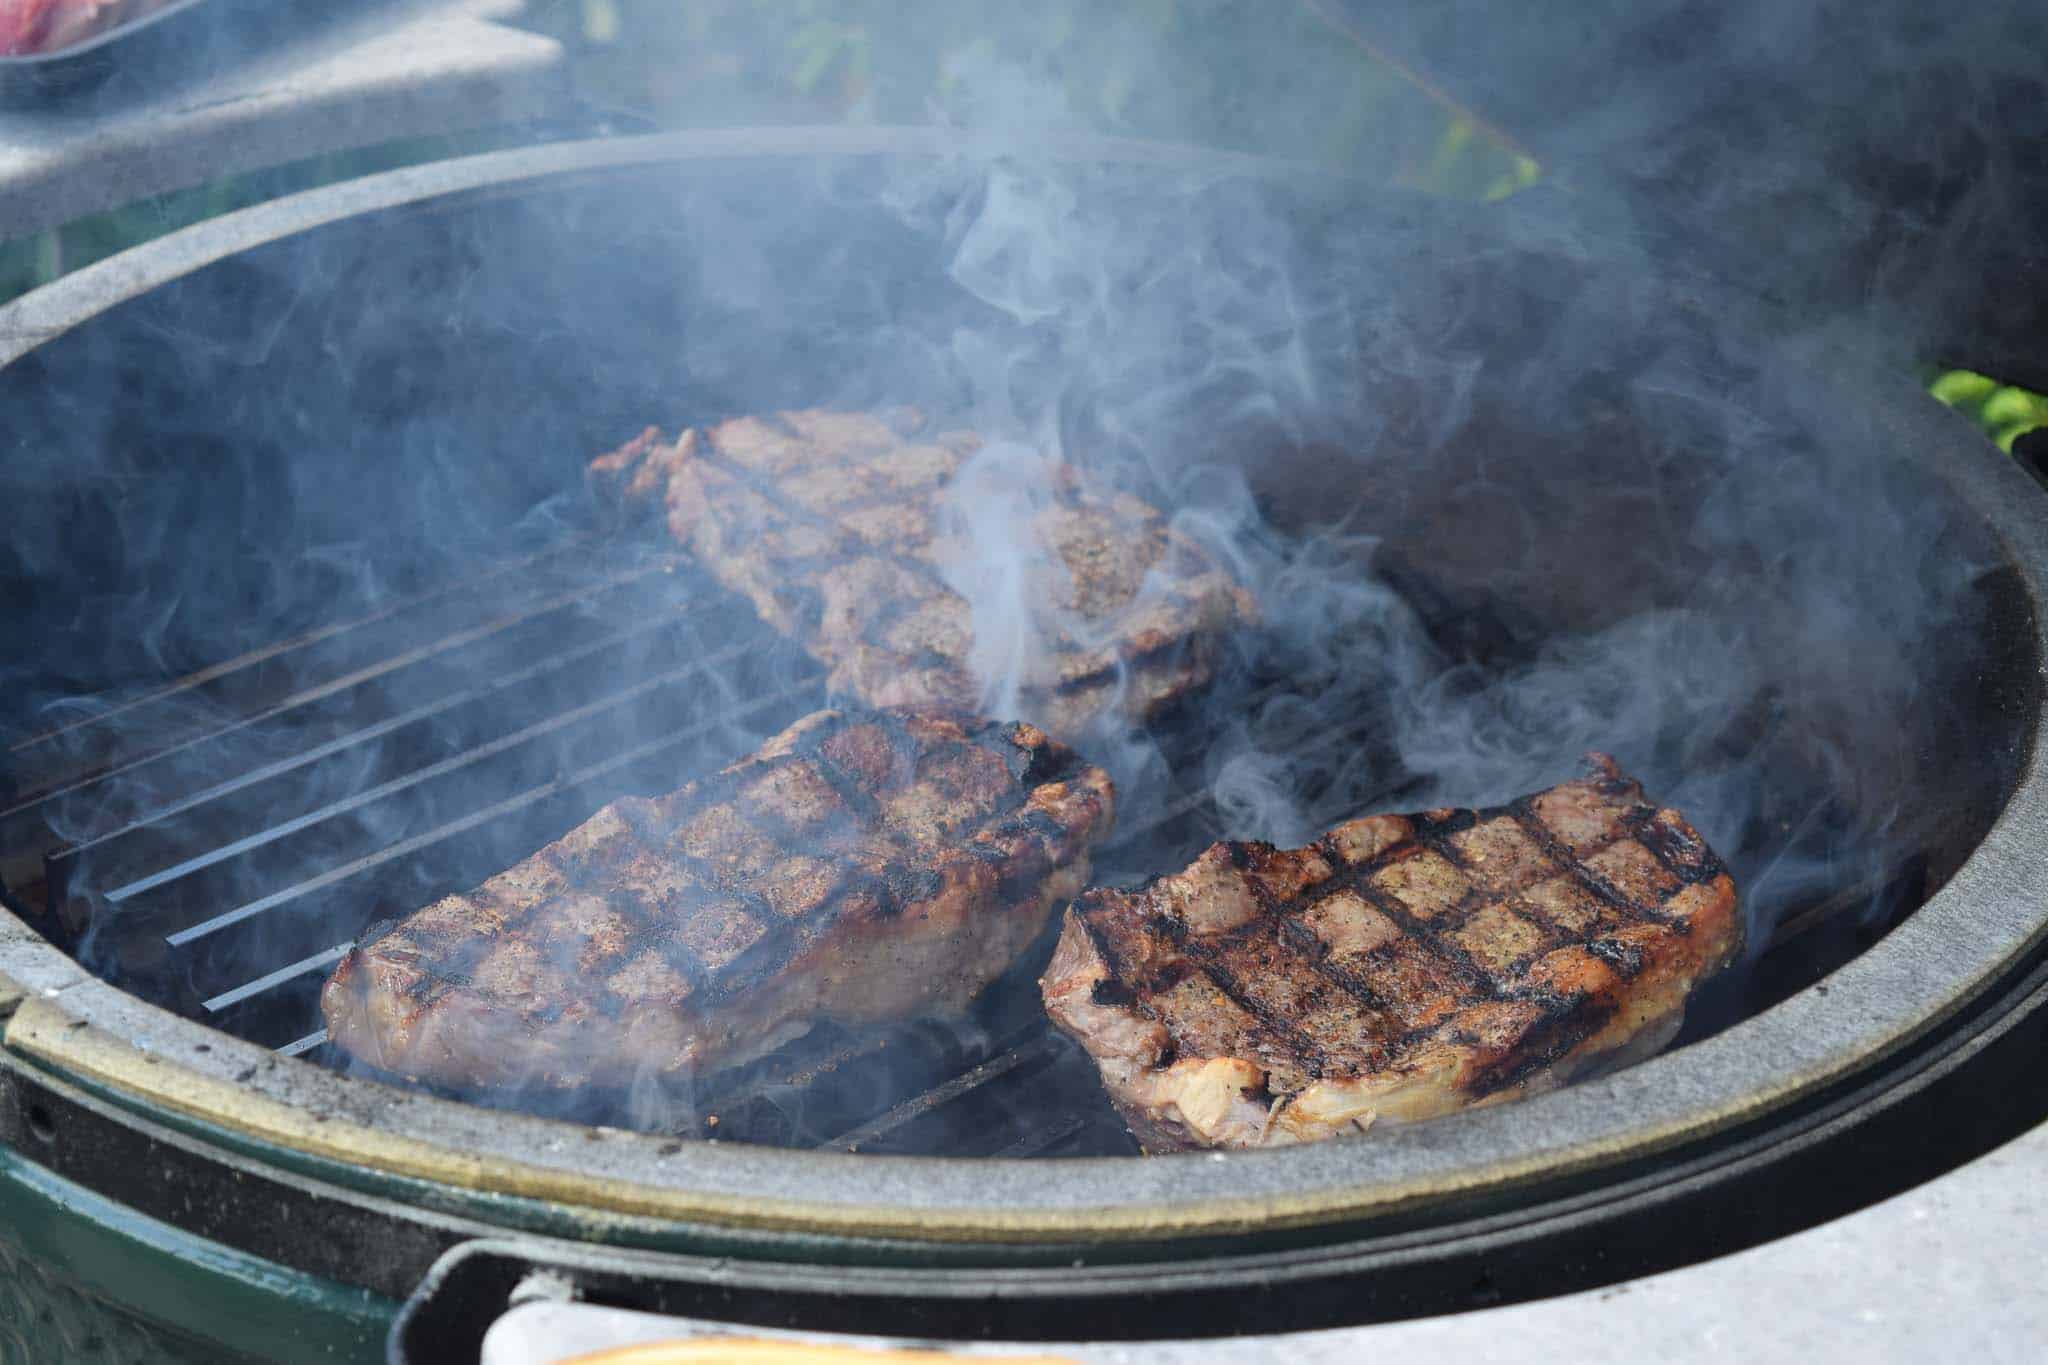 Steaks being grilled on a Big Green Egg close up view with smoke rising